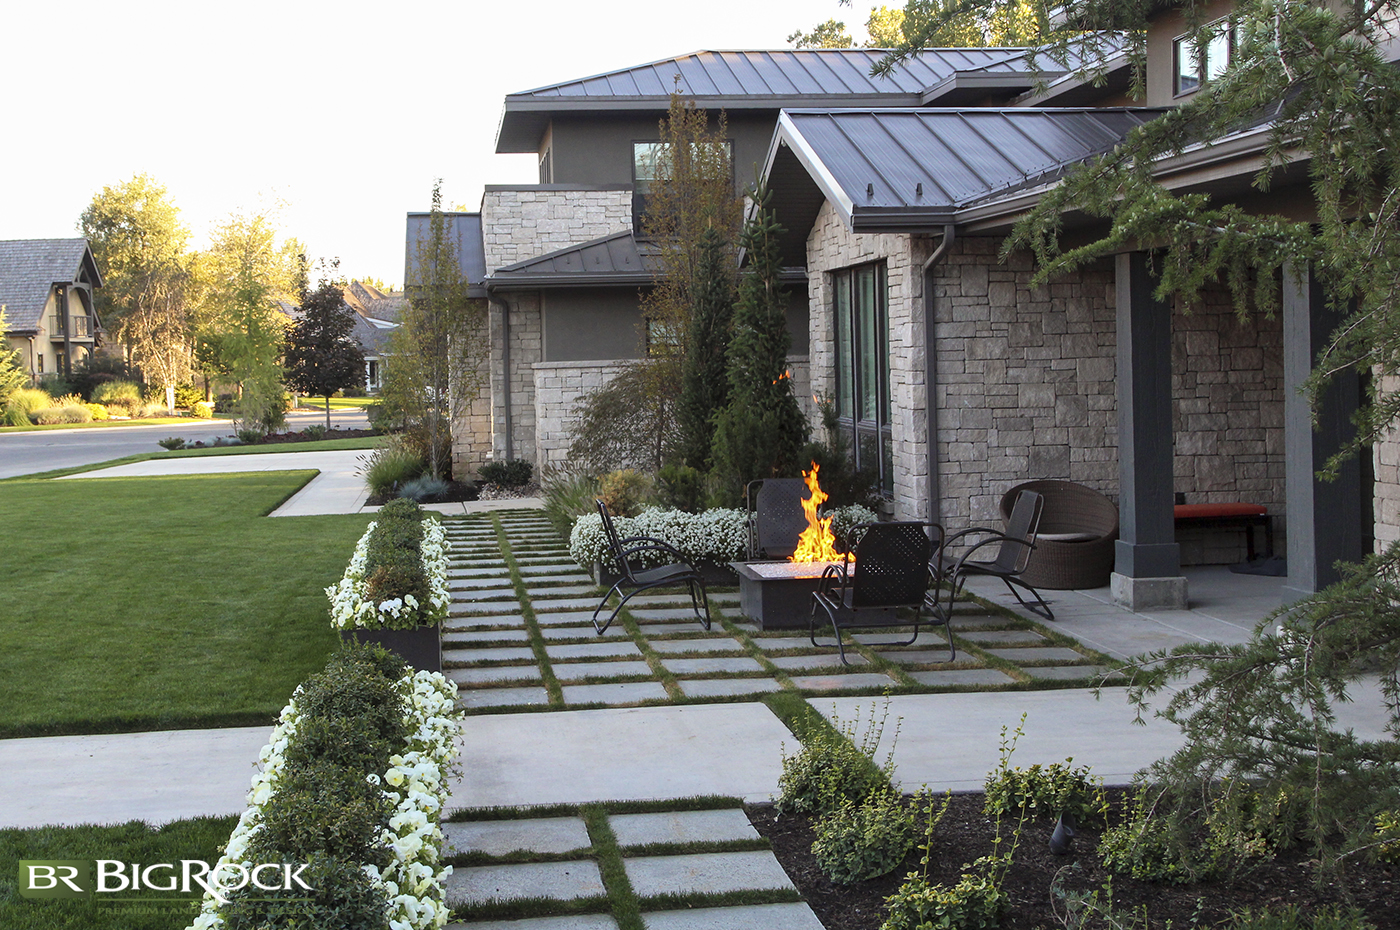 Break up grass and garden beds with pavers or cement designs to create landscaping interest and unique options for landscaping.